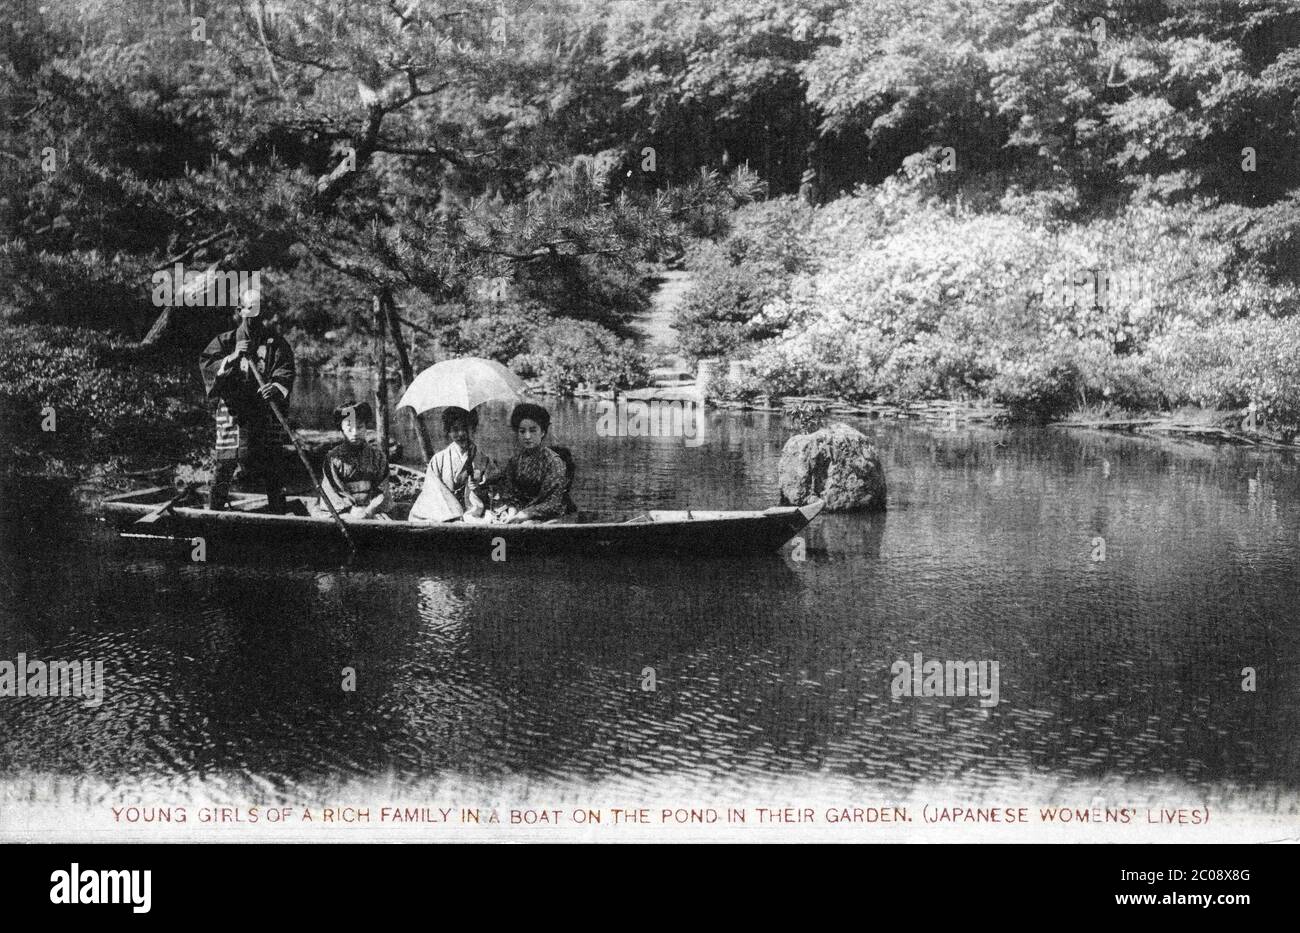 [ 1920s Japan - Women in a Boat ] — Young Japanese women in a boat.  Original text: Young girls of a rich family in a boat on the pond in their garden. (Japanese Women's Lives)  20th century vintage postcard. Stock Photo